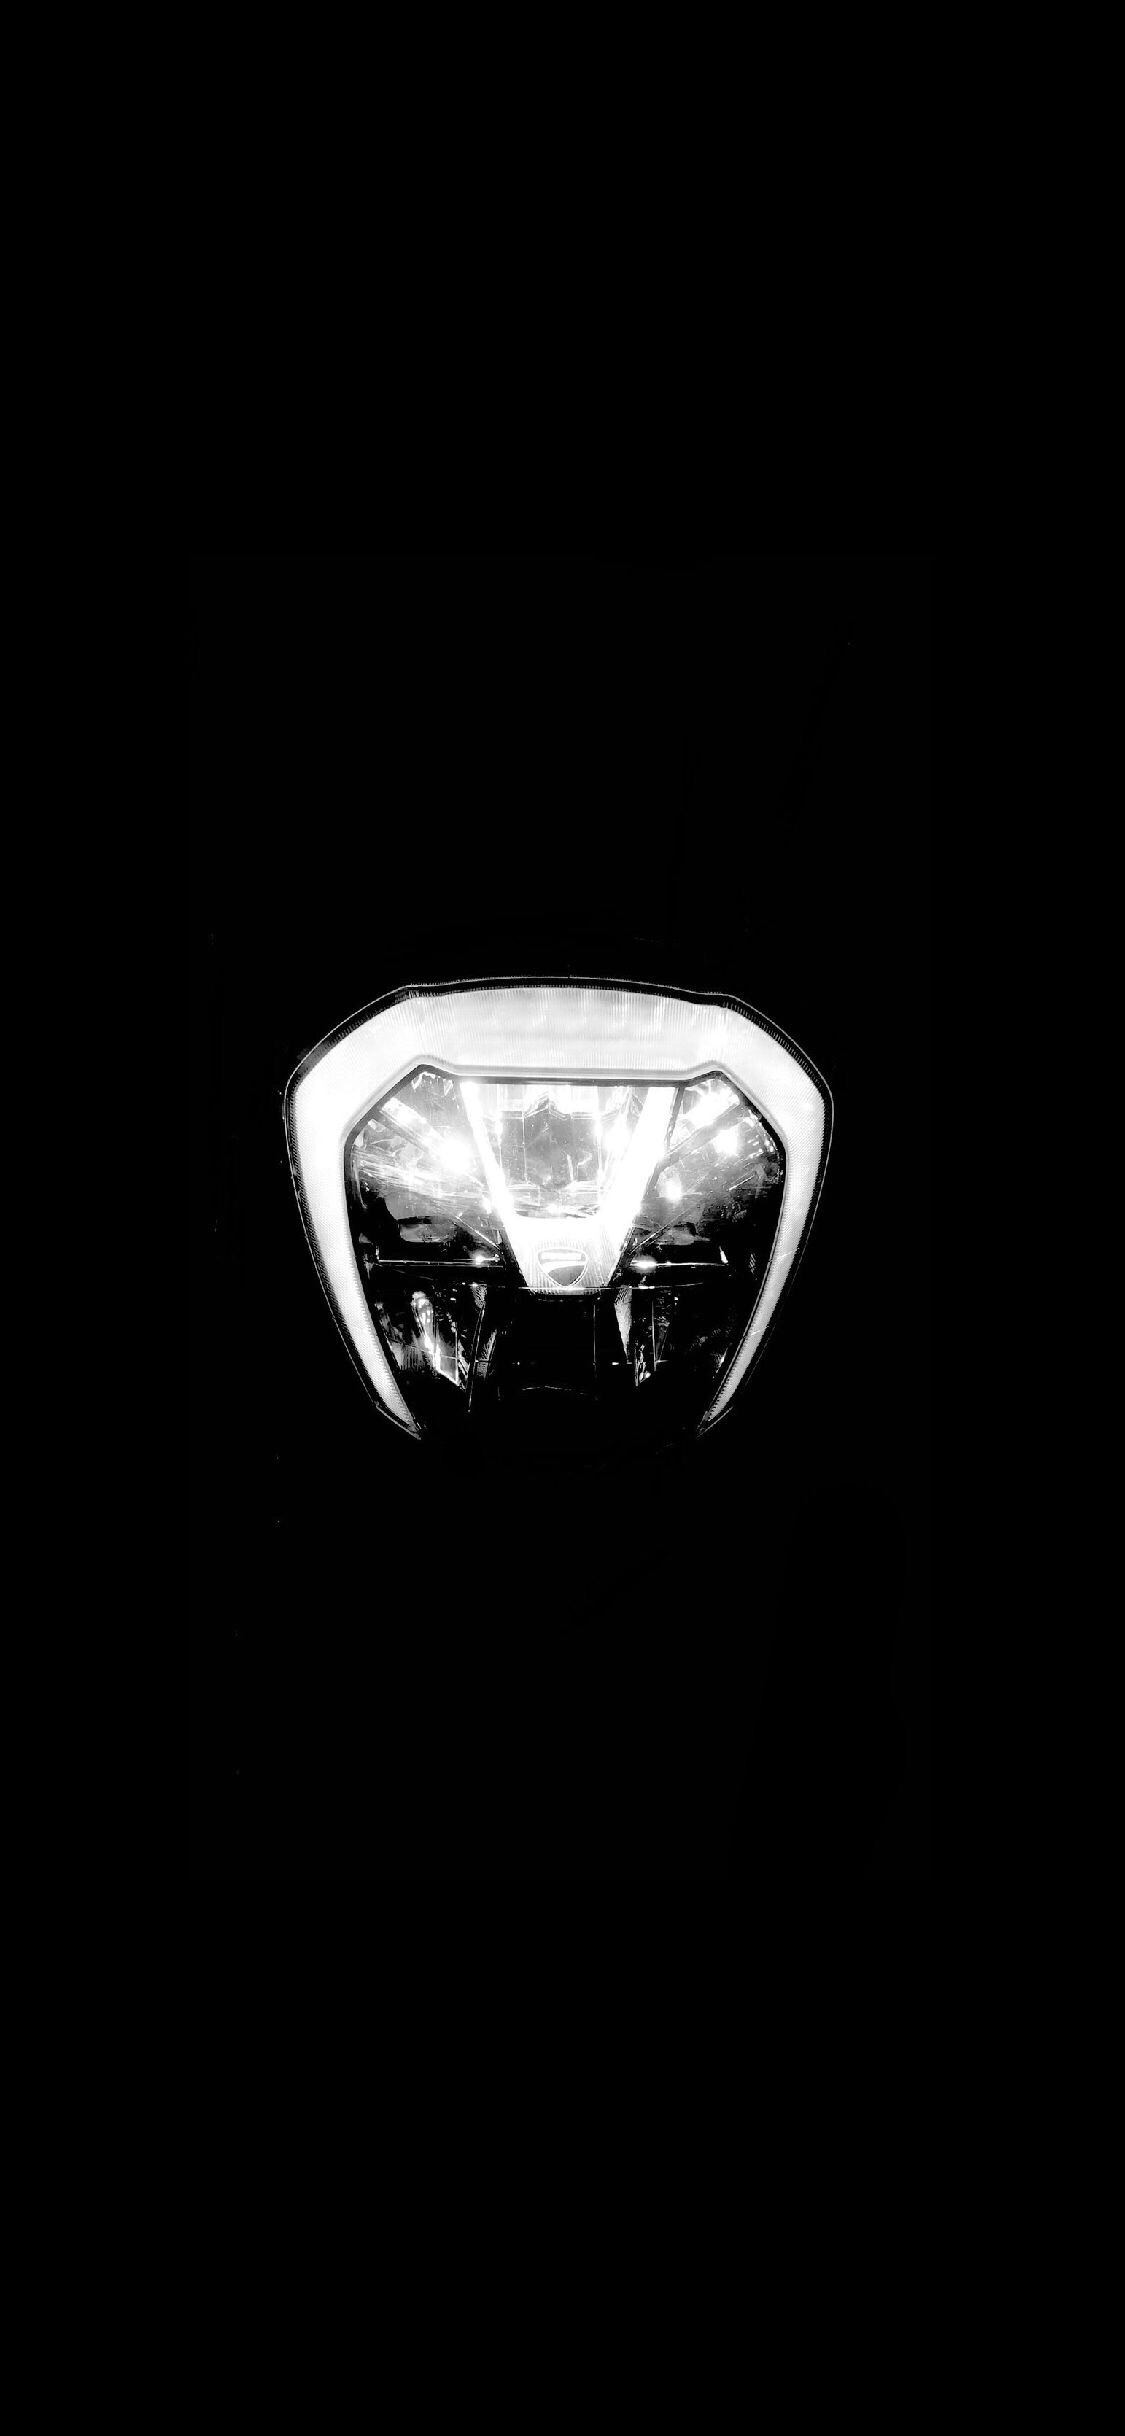 Made an iPhone X wallpaper with the headlight of my Xdiavel